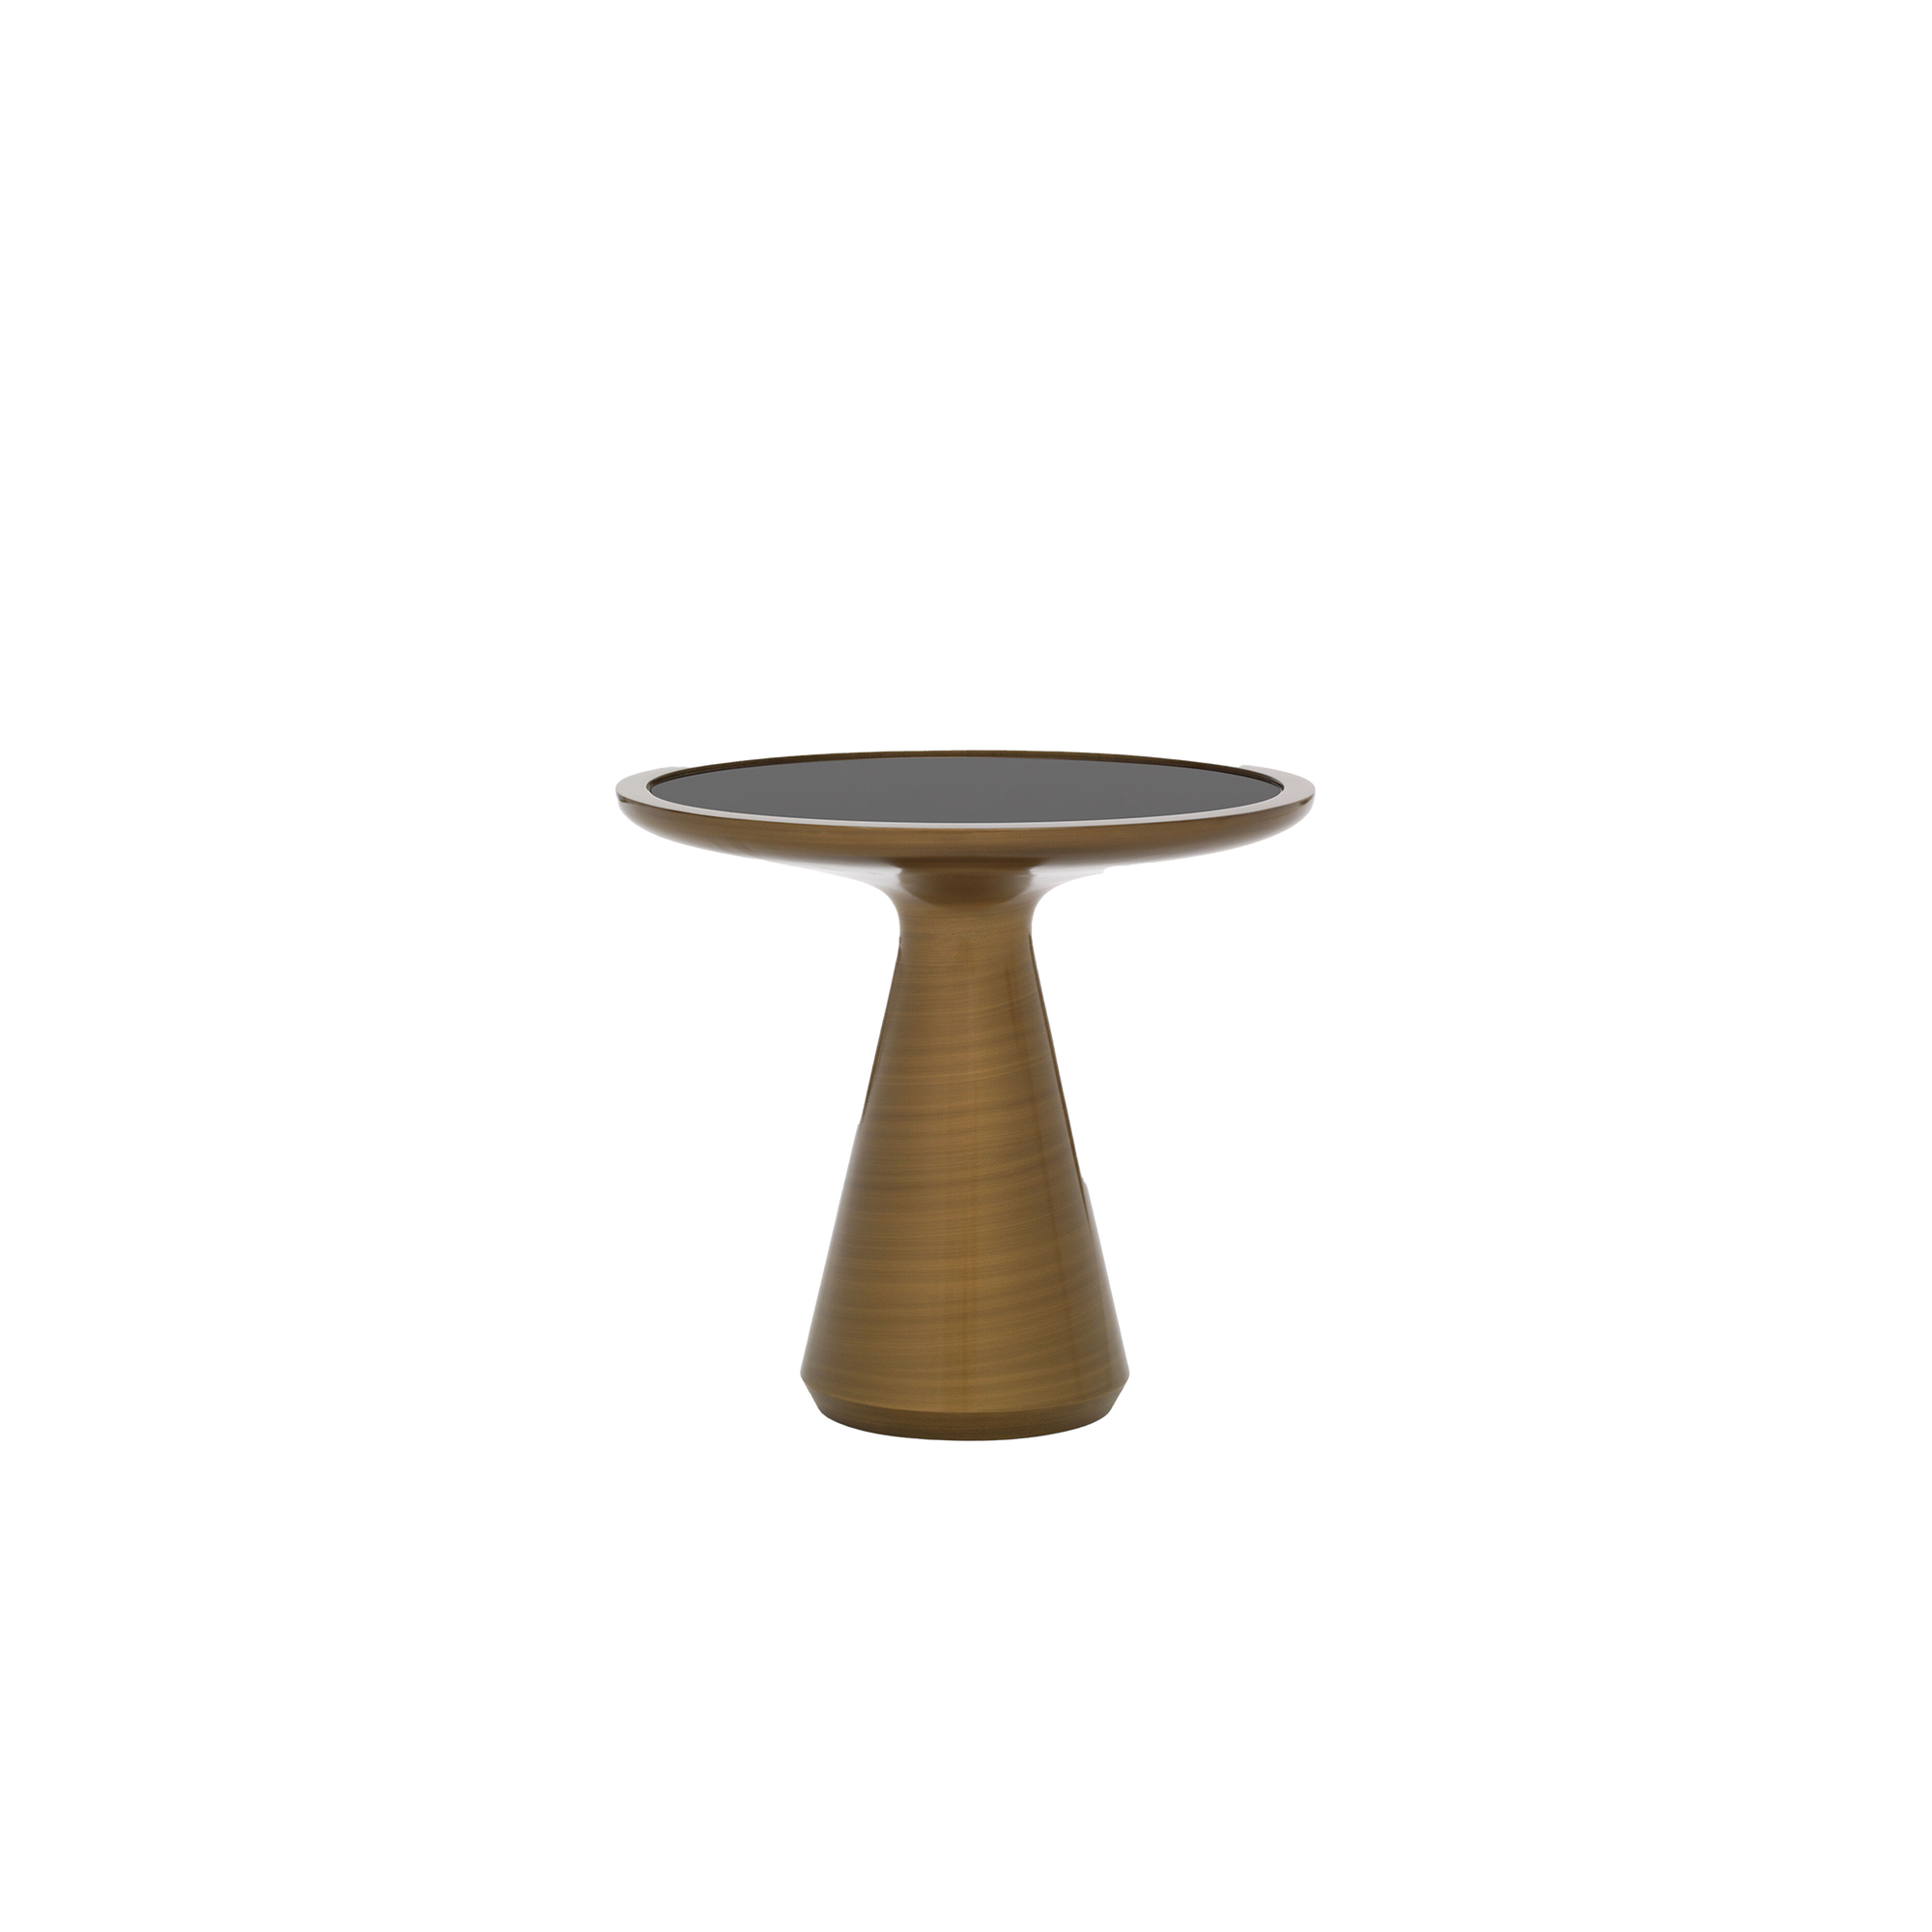 Simply elegant, the Taper Side Table is a chic sculptural centerpiece.